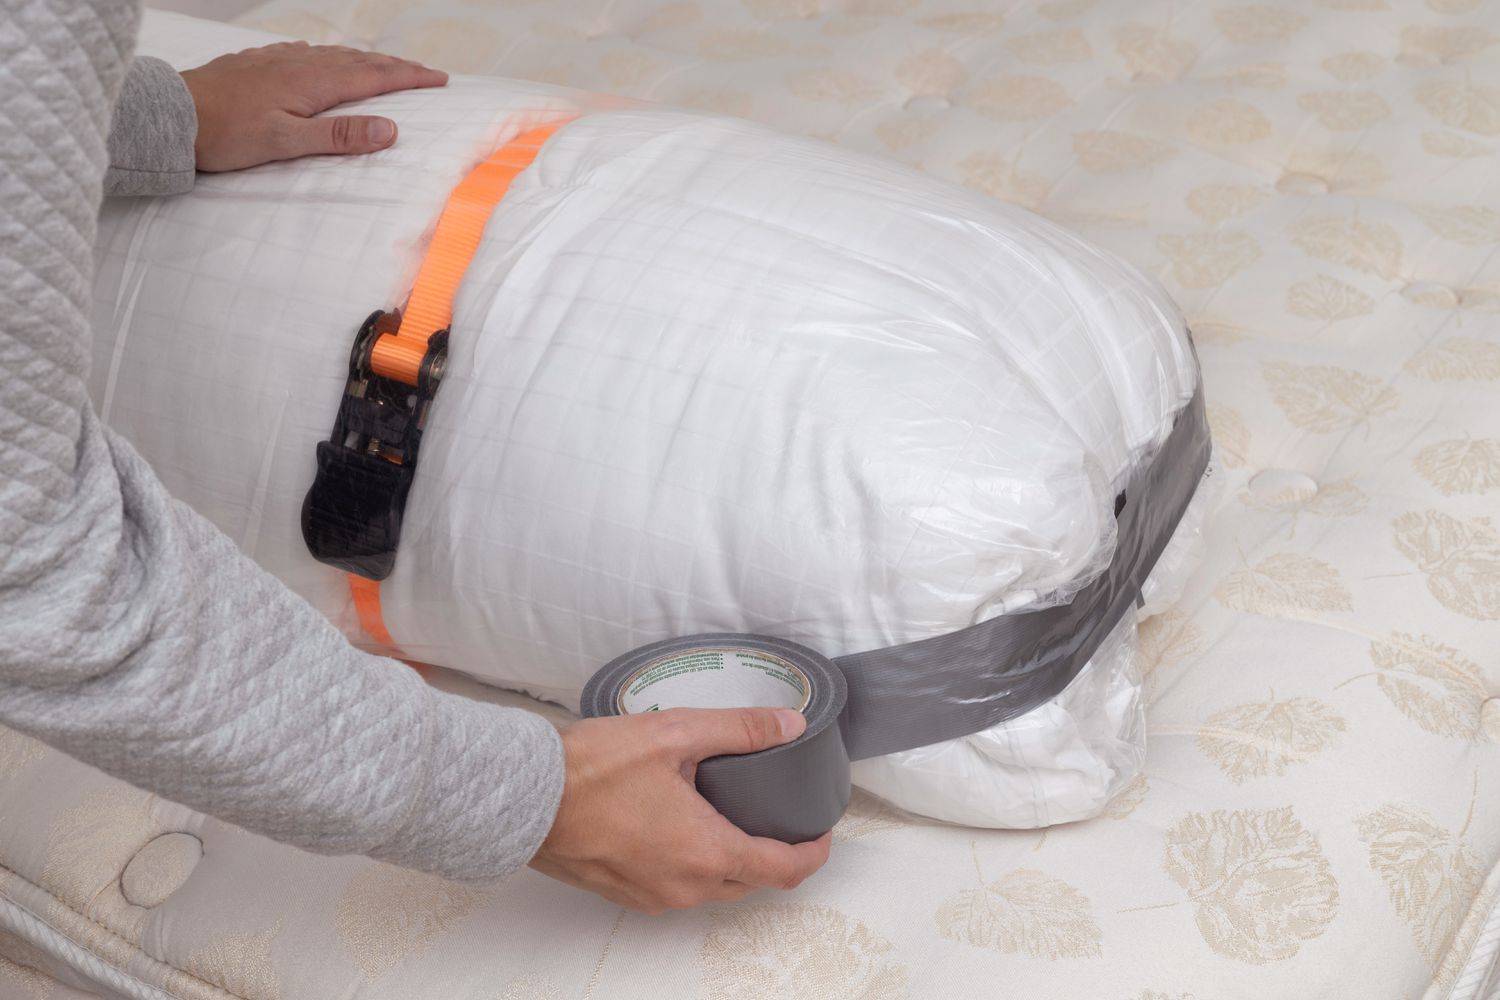 Mattress topper wrapped in vacuum sealing bag and sealed with duct tape